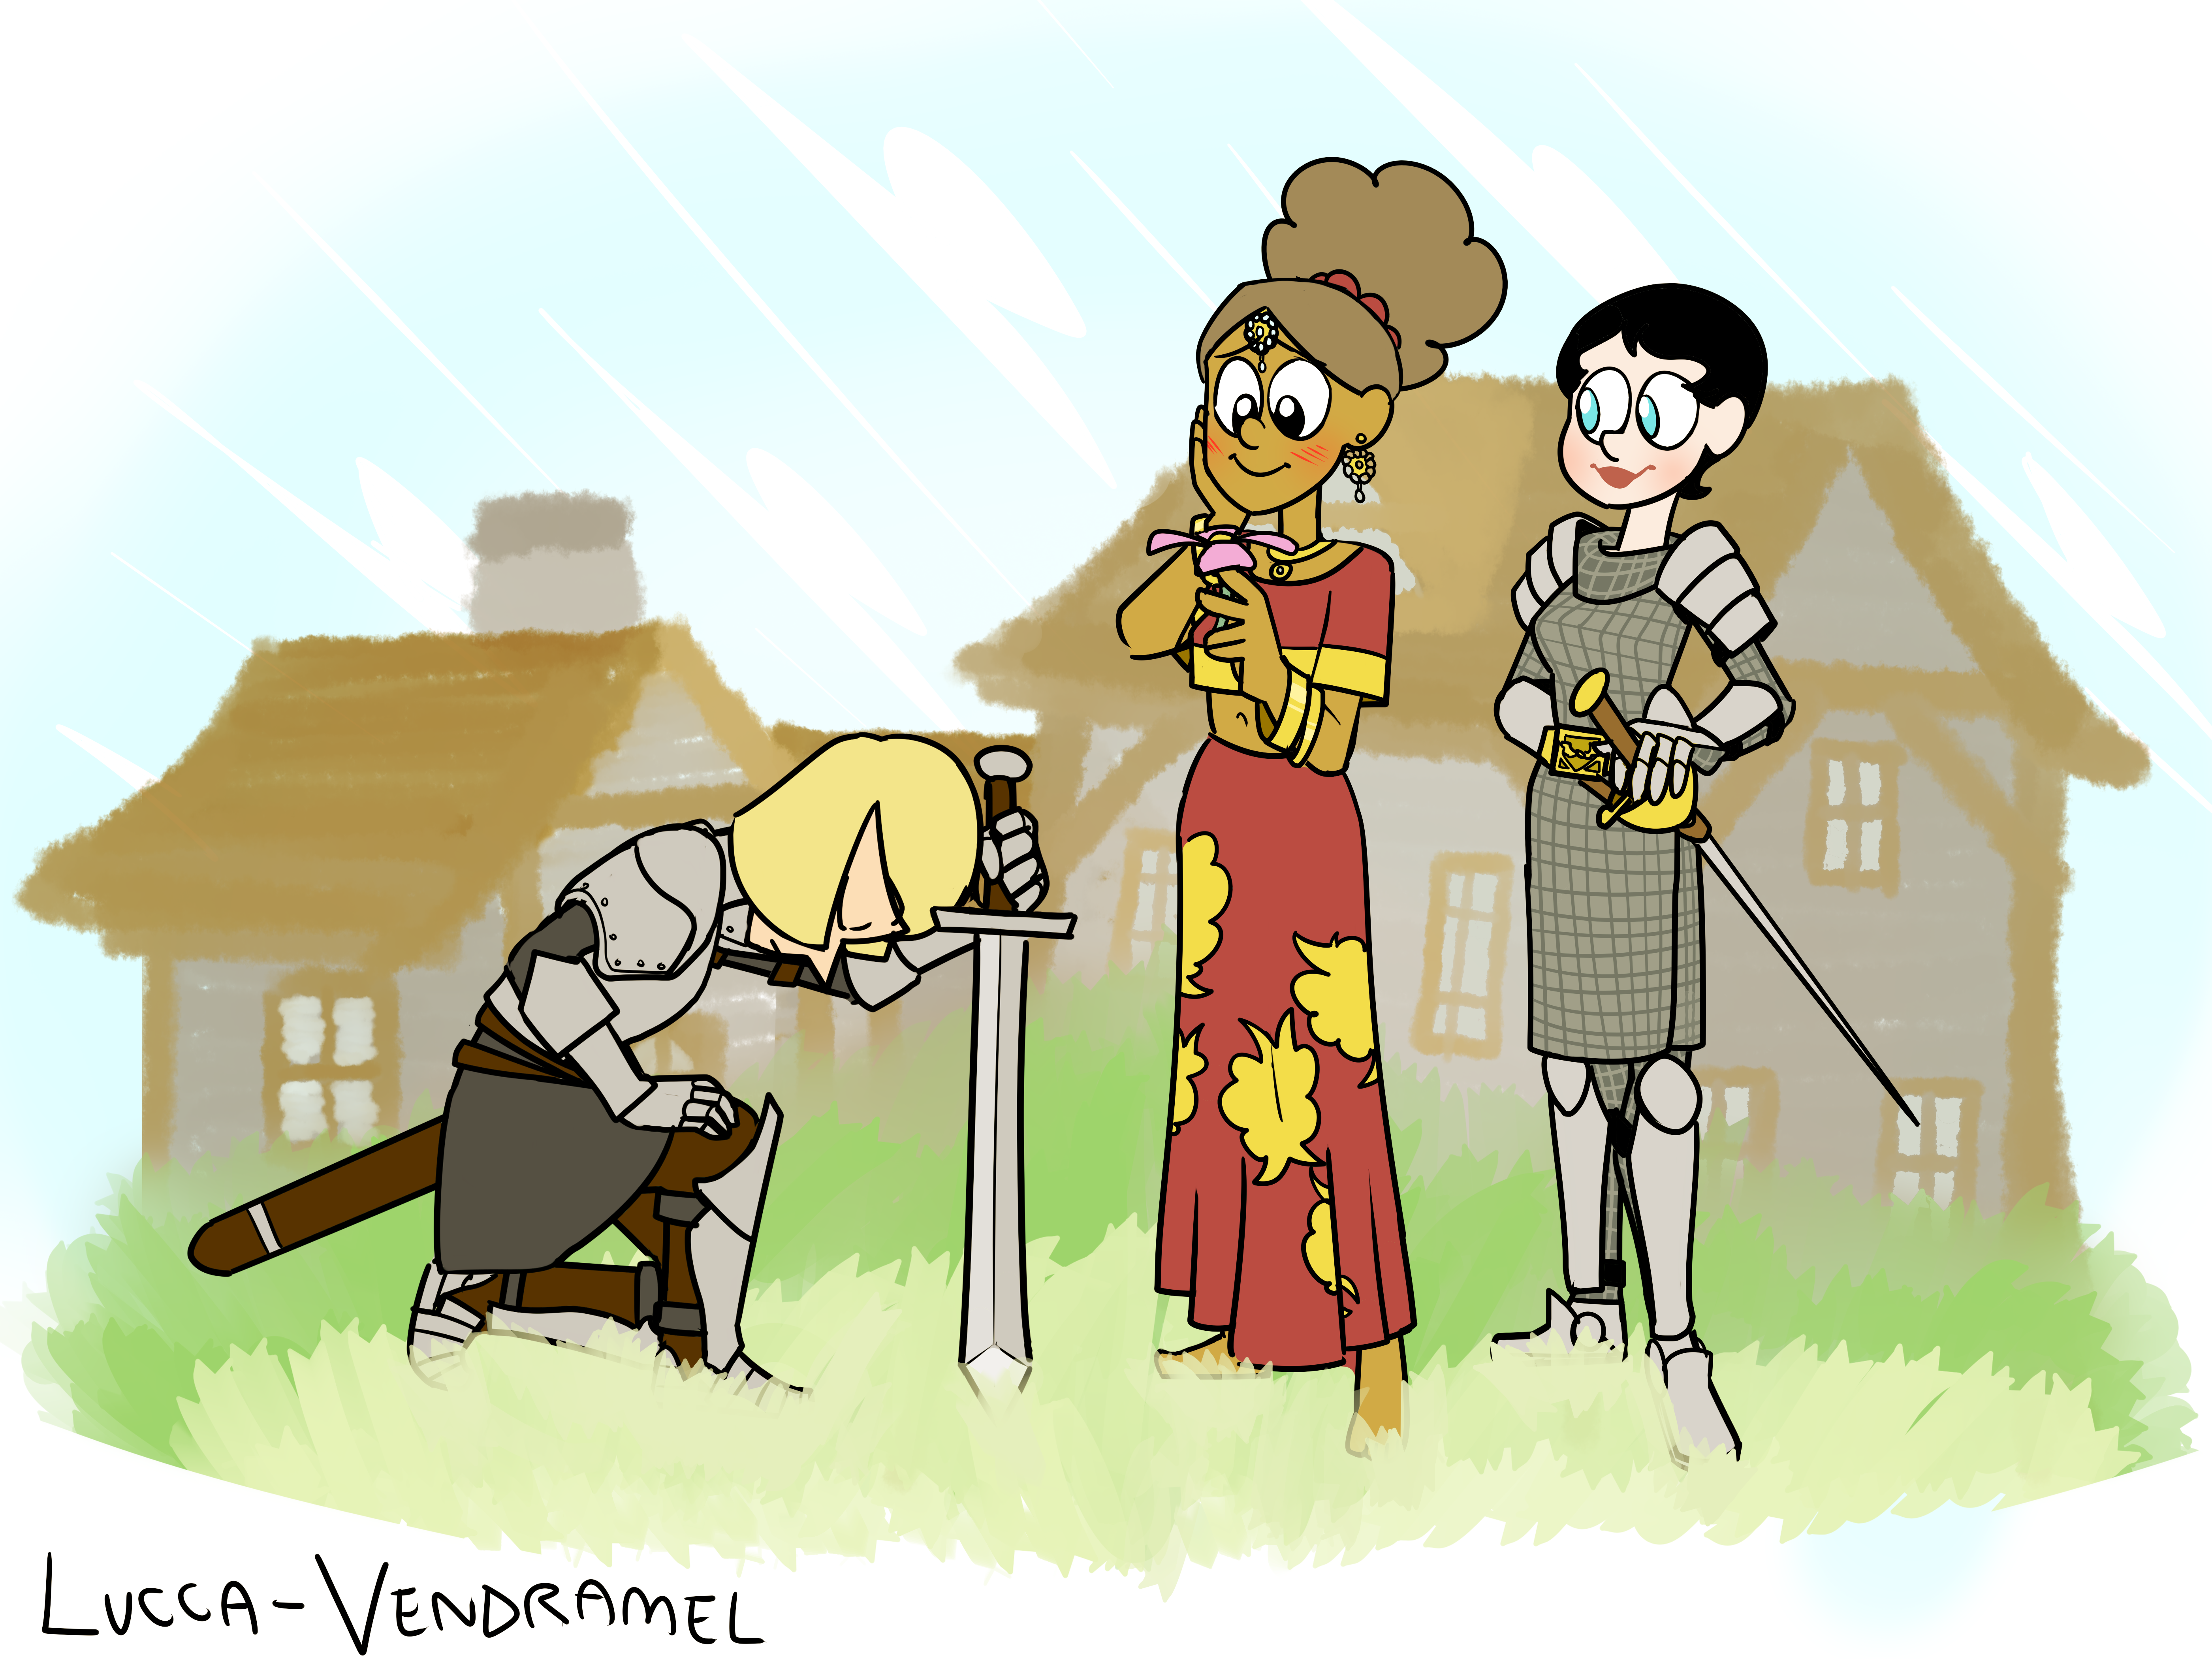 The Knight, The Princess And The Bodyguard by Lucca-Vendramel on DeviantArt